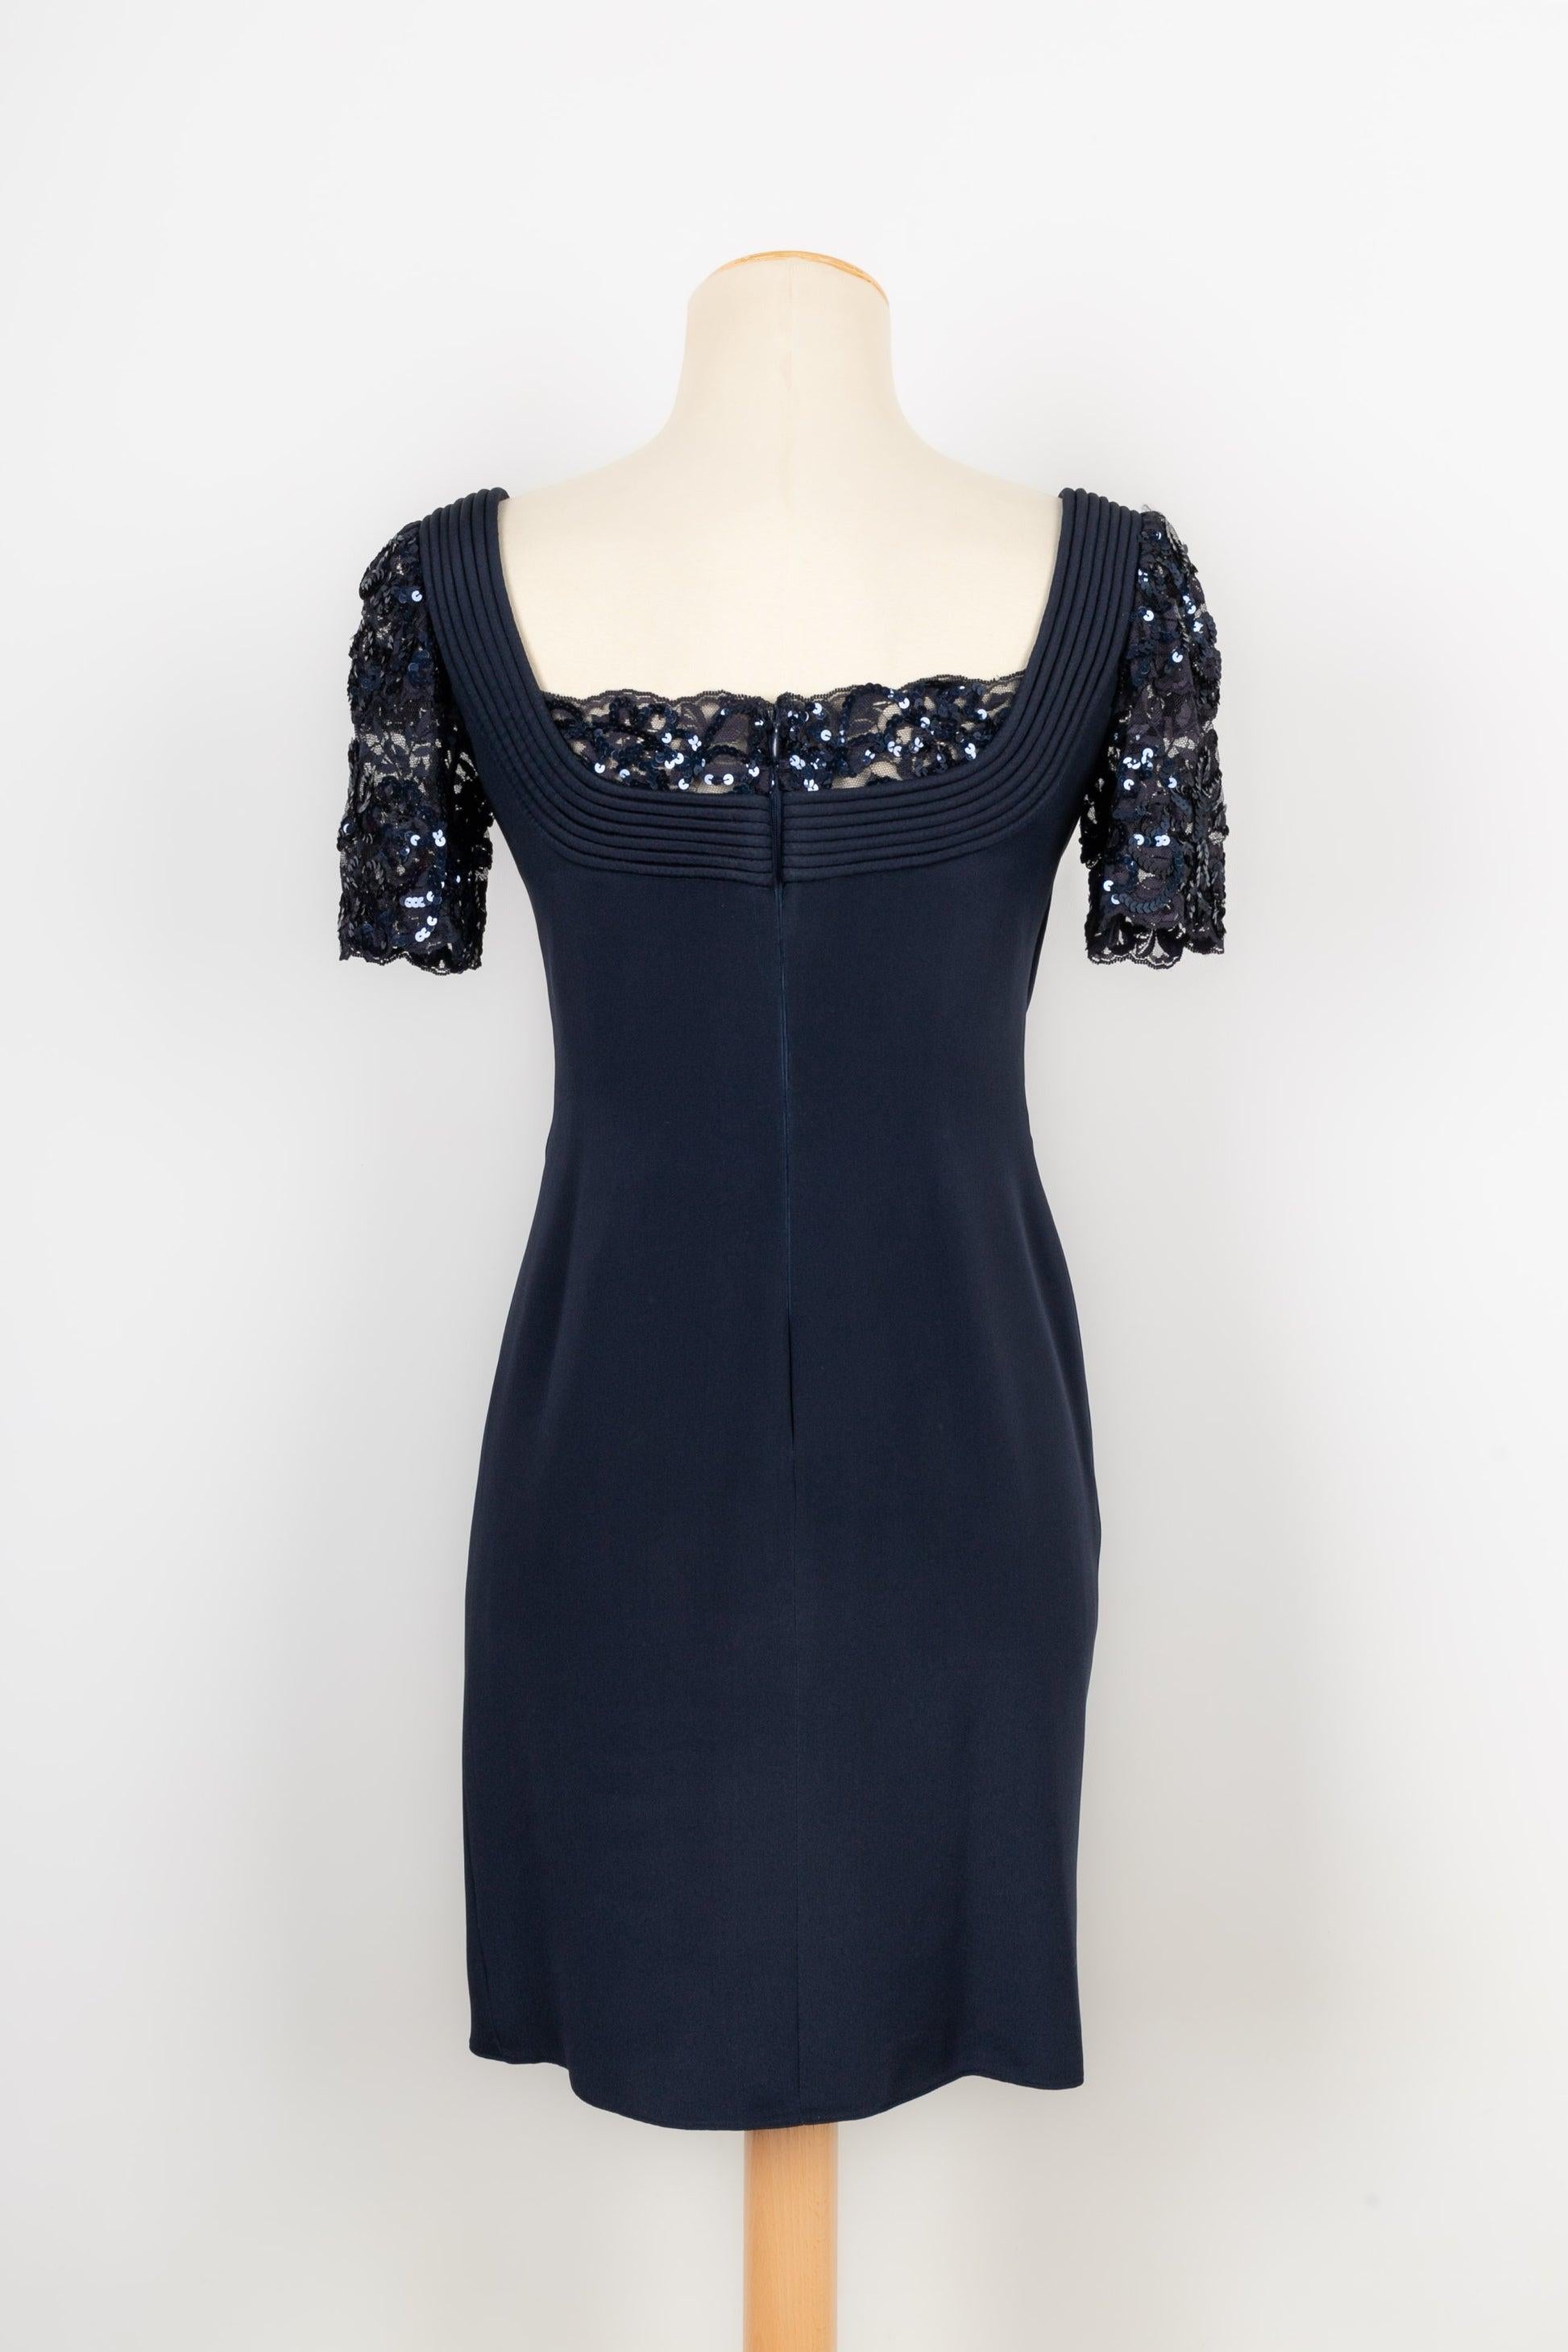 Loris Azzaro Midnight Blue Evening Dress in Taffeta, Lace and Sequins In Excellent Condition For Sale In SAINT-OUEN-SUR-SEINE, FR